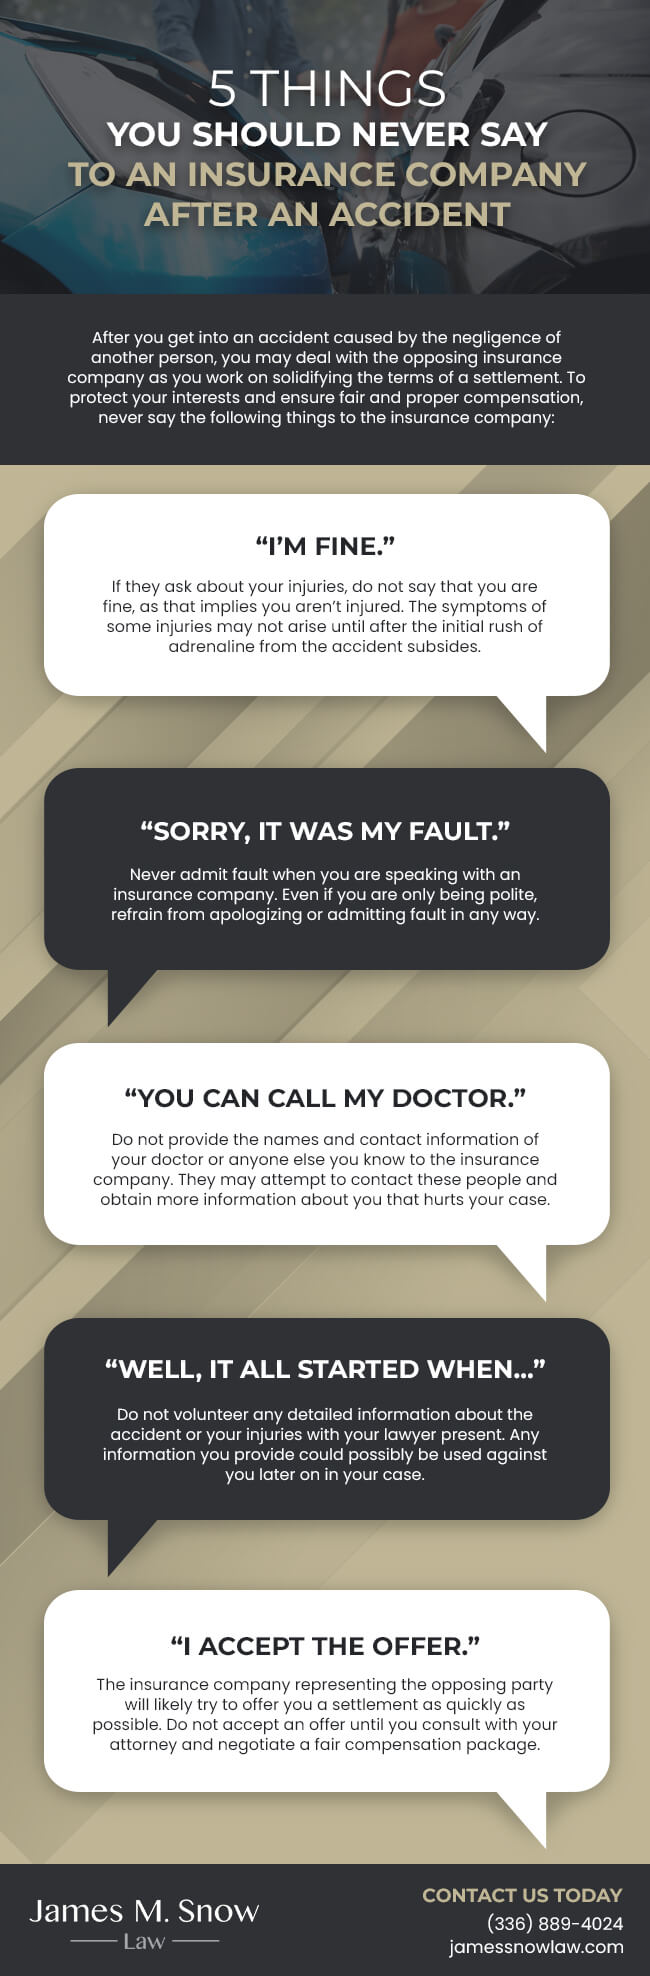 5 Things You Should Never Say to an Insurance Company After an Accident 